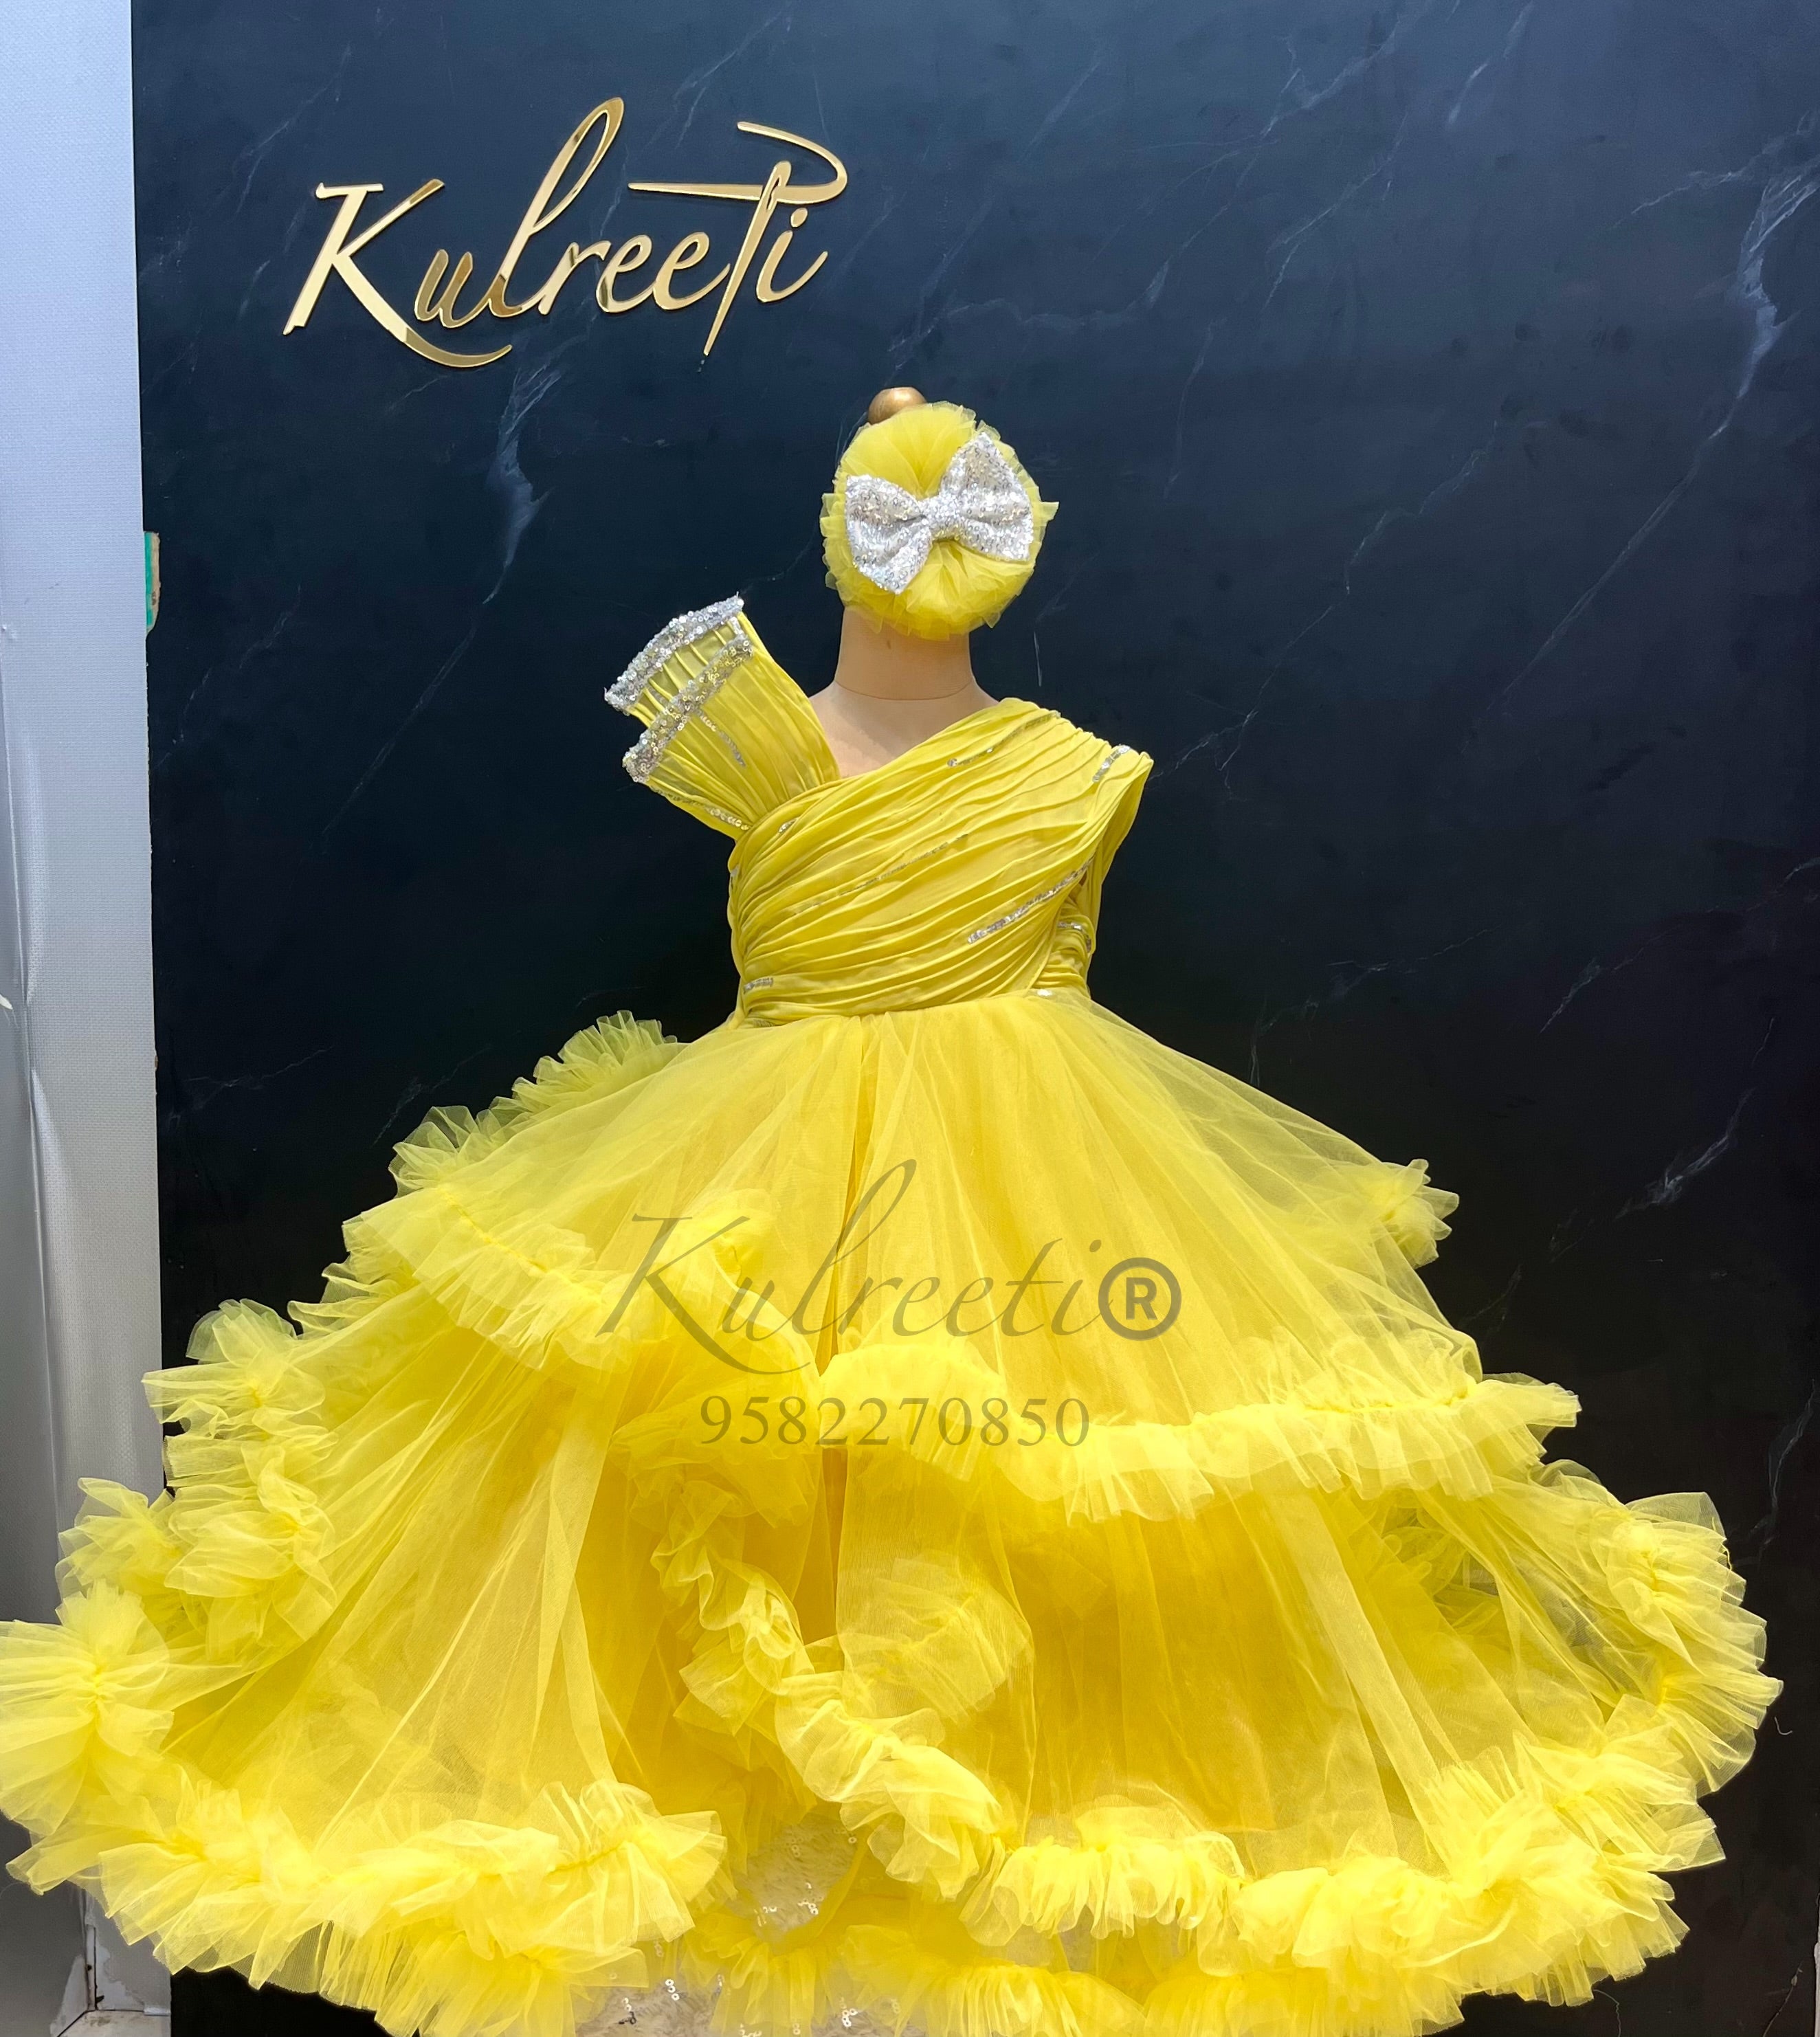 new gown ke design|new gown design 2020| latest party wear gown dress design|party  wear dresses | Maxi dress with sleeves, Green lace maxi dress, Maxi dress